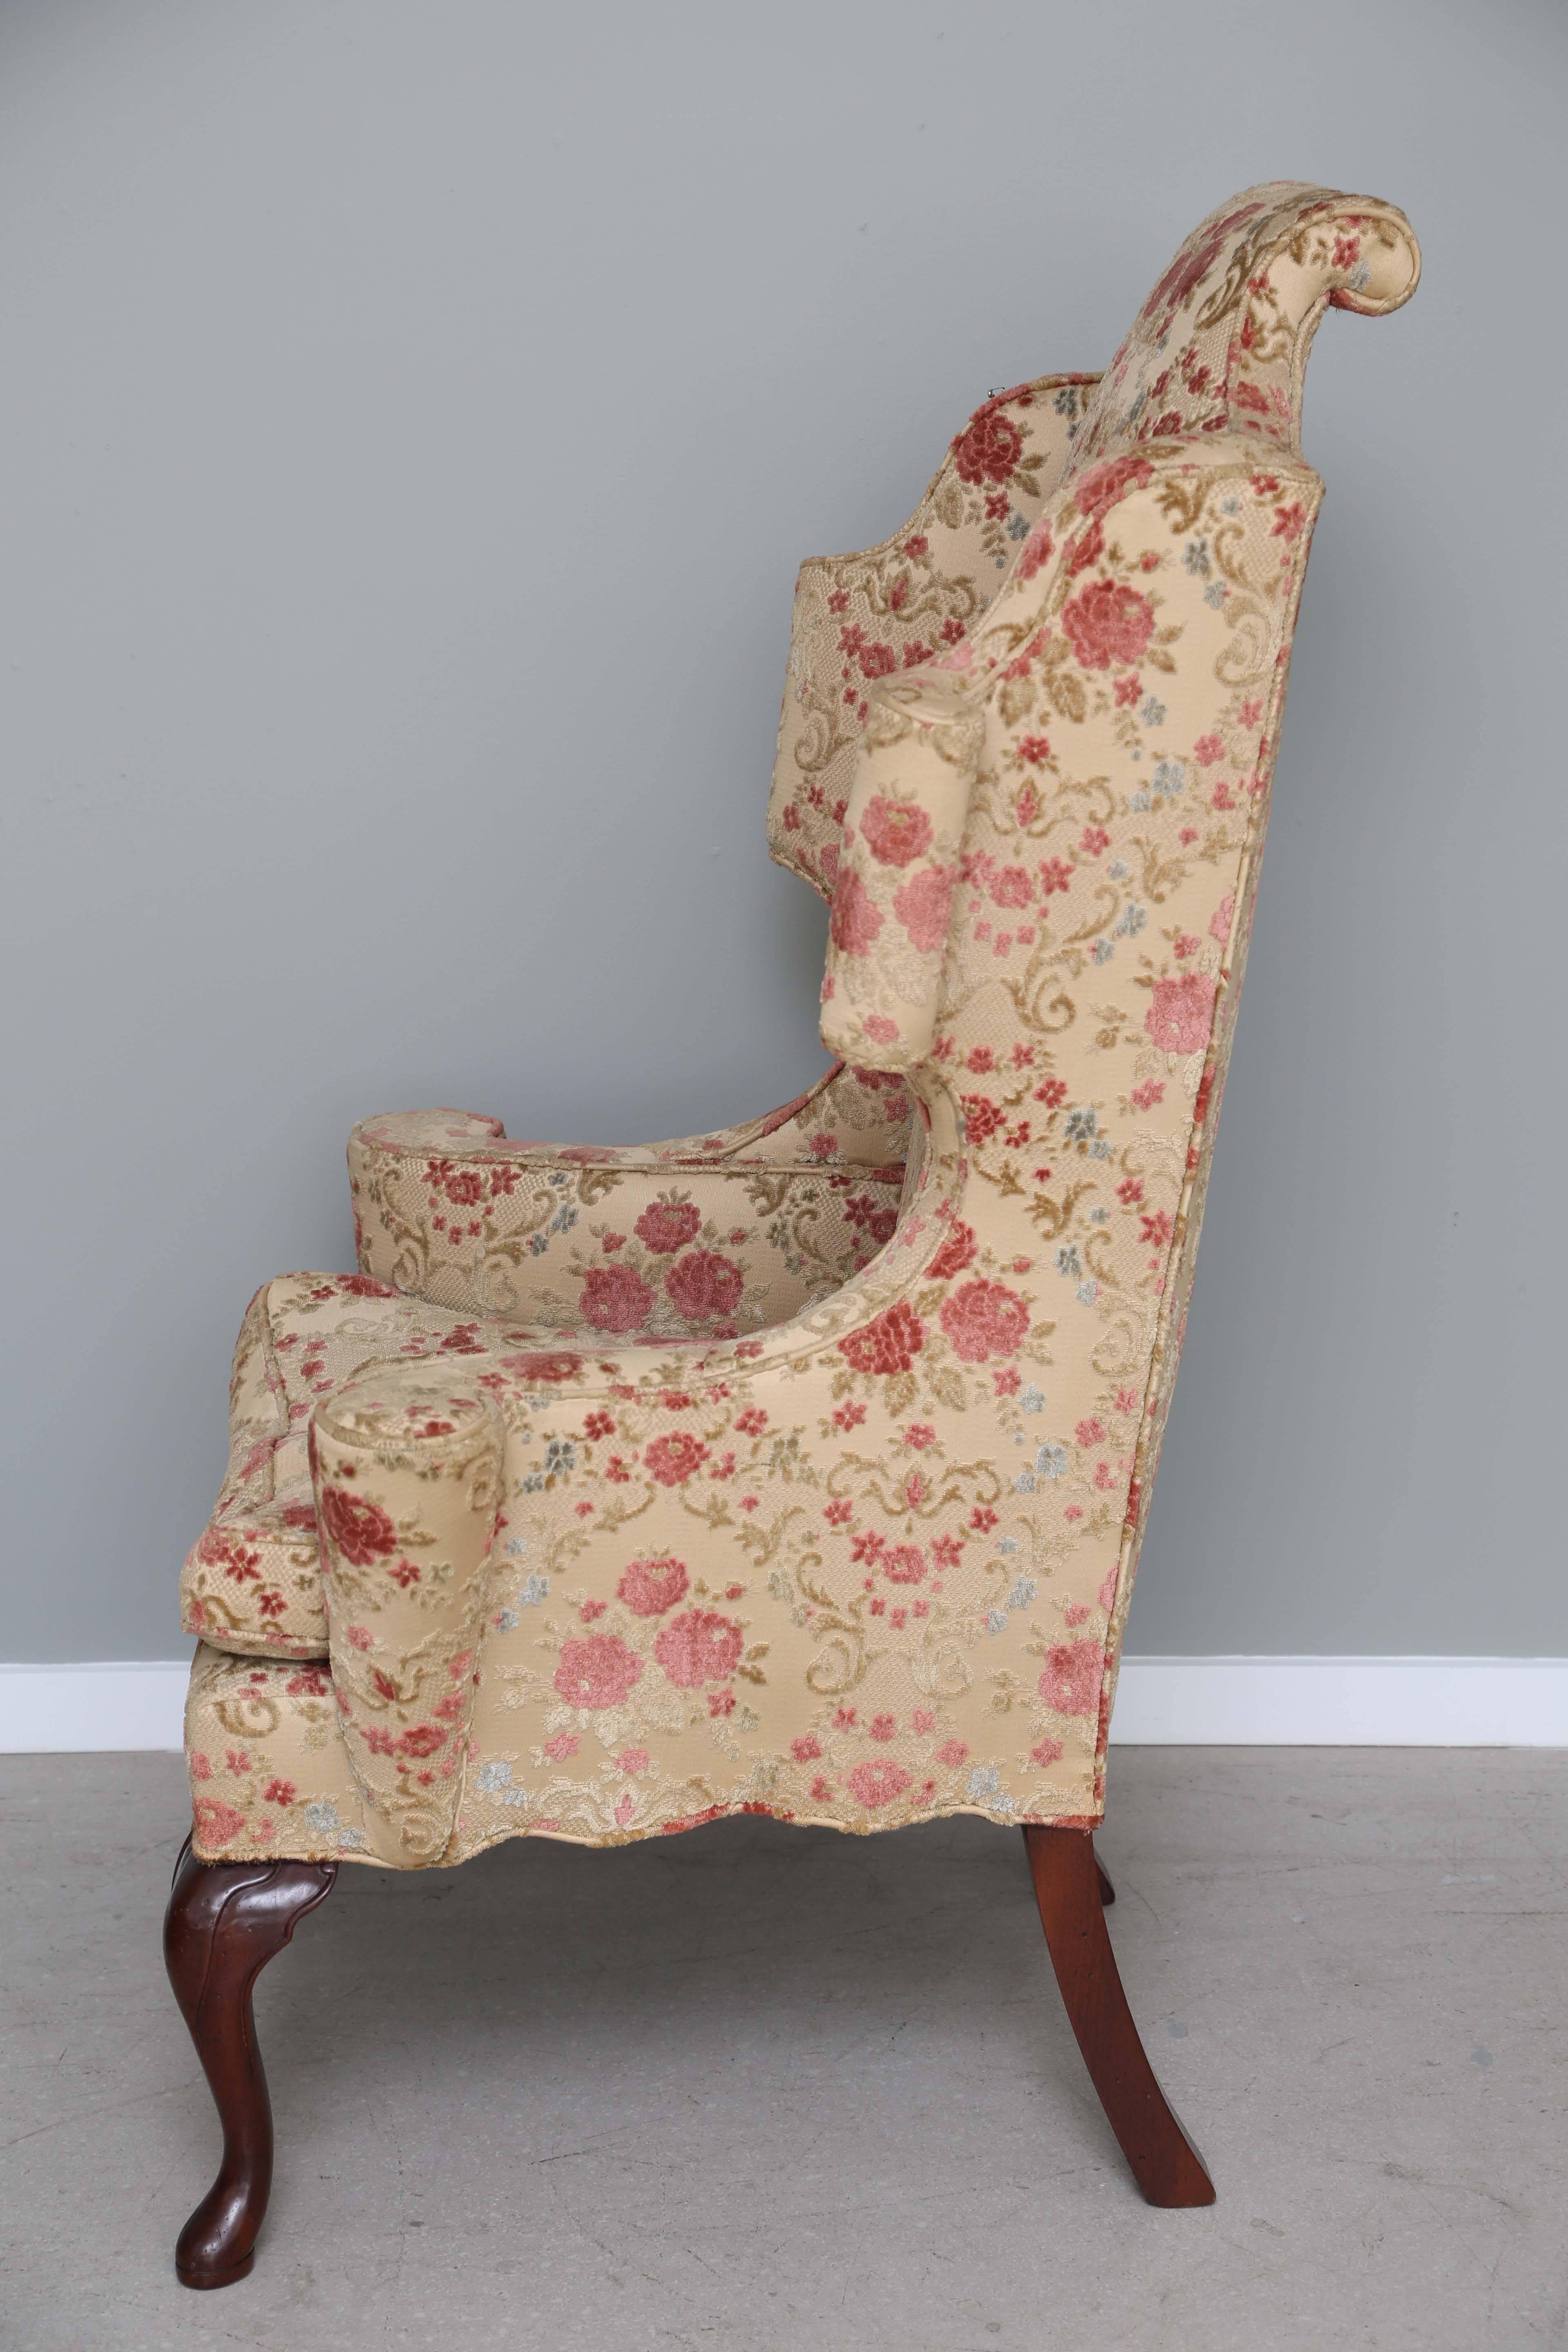 Dynamic Queen Anne Style Chair with Floral Upholstery For Sale 1